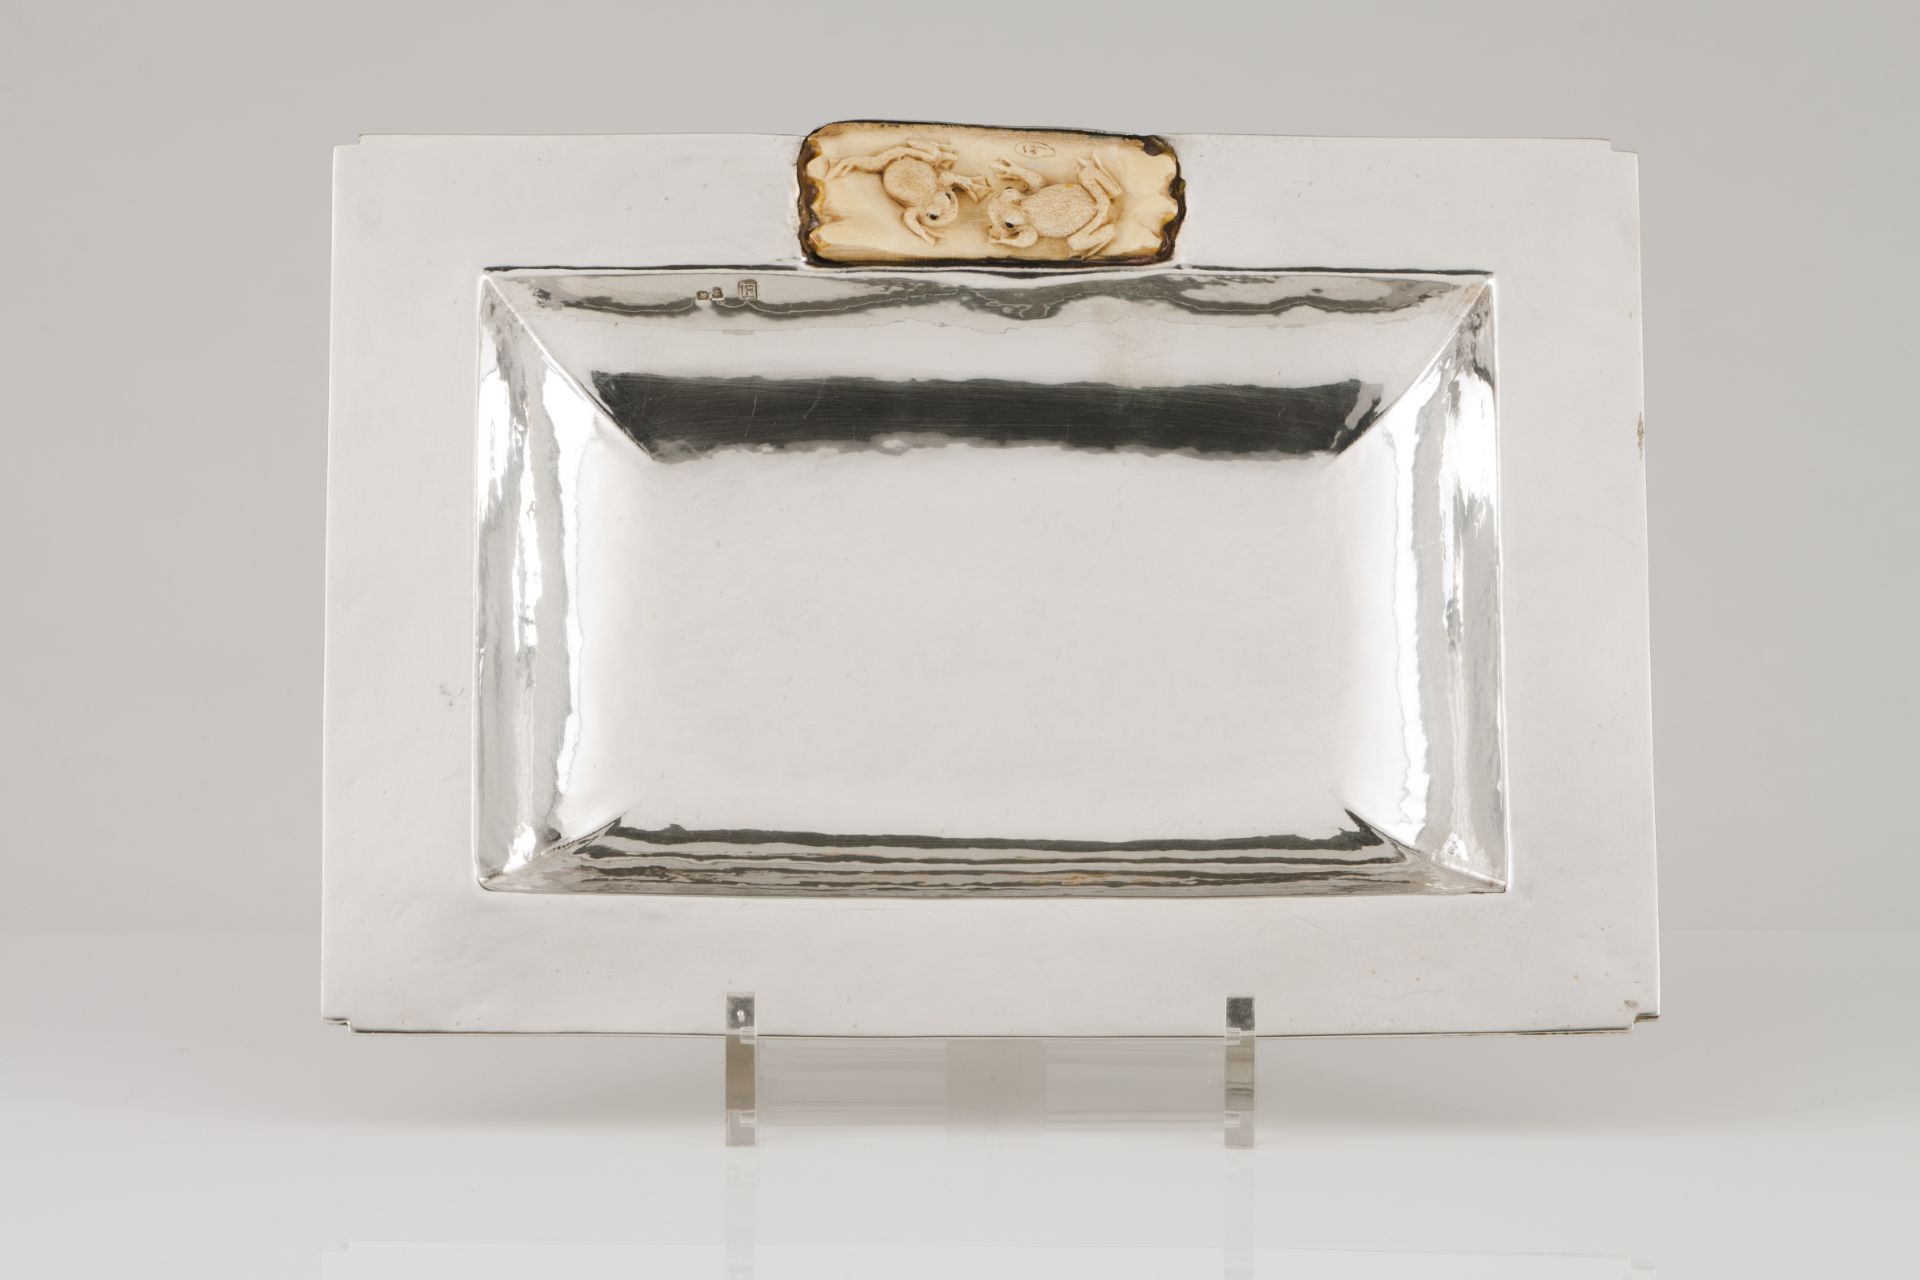 A Luis Ferreira traySilver Rectangular shaped of hammered decoration and applied carved bone